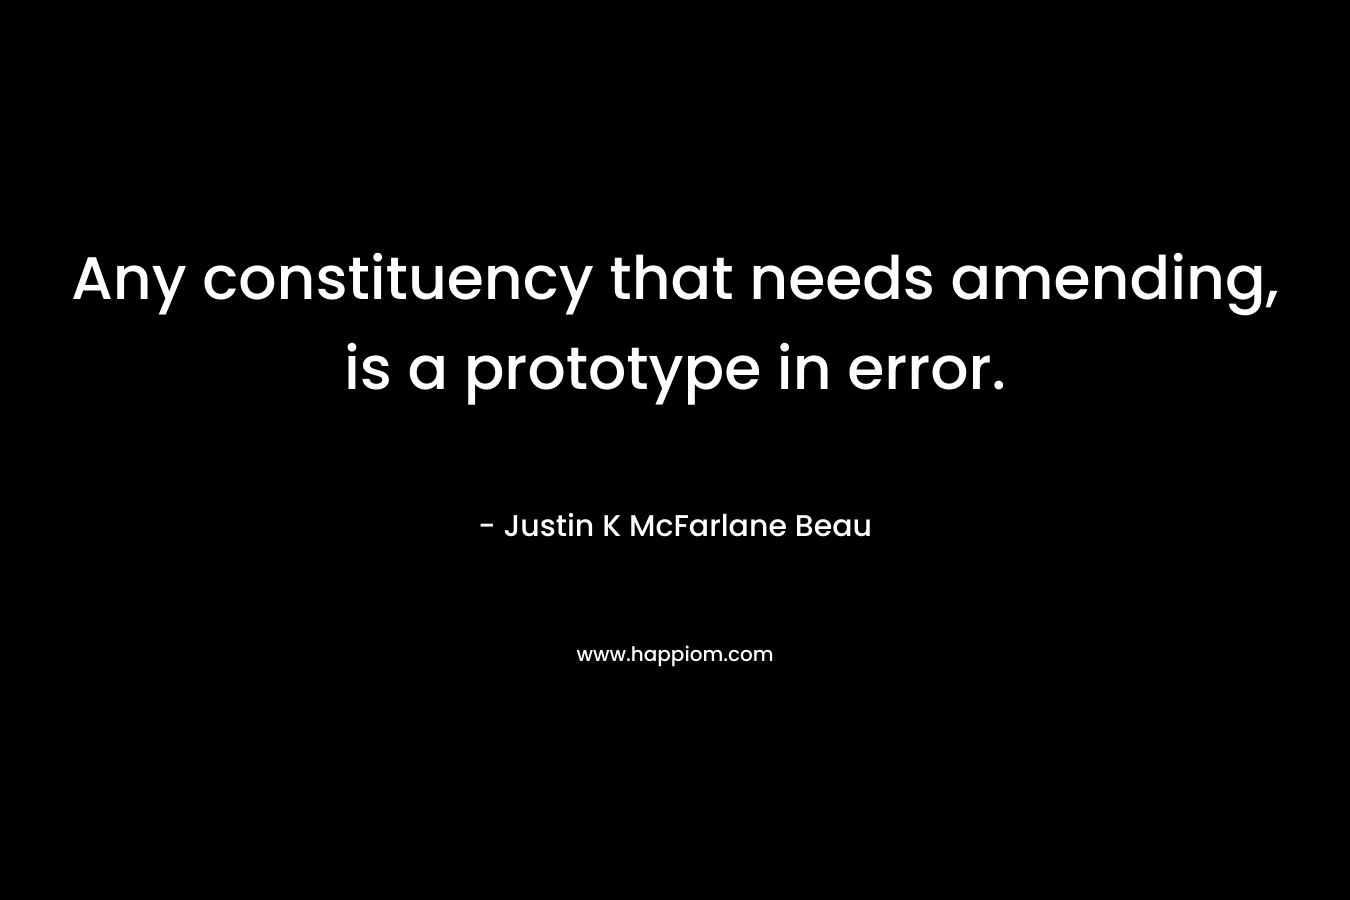 Any constituency that needs amending, is a prototype in error.